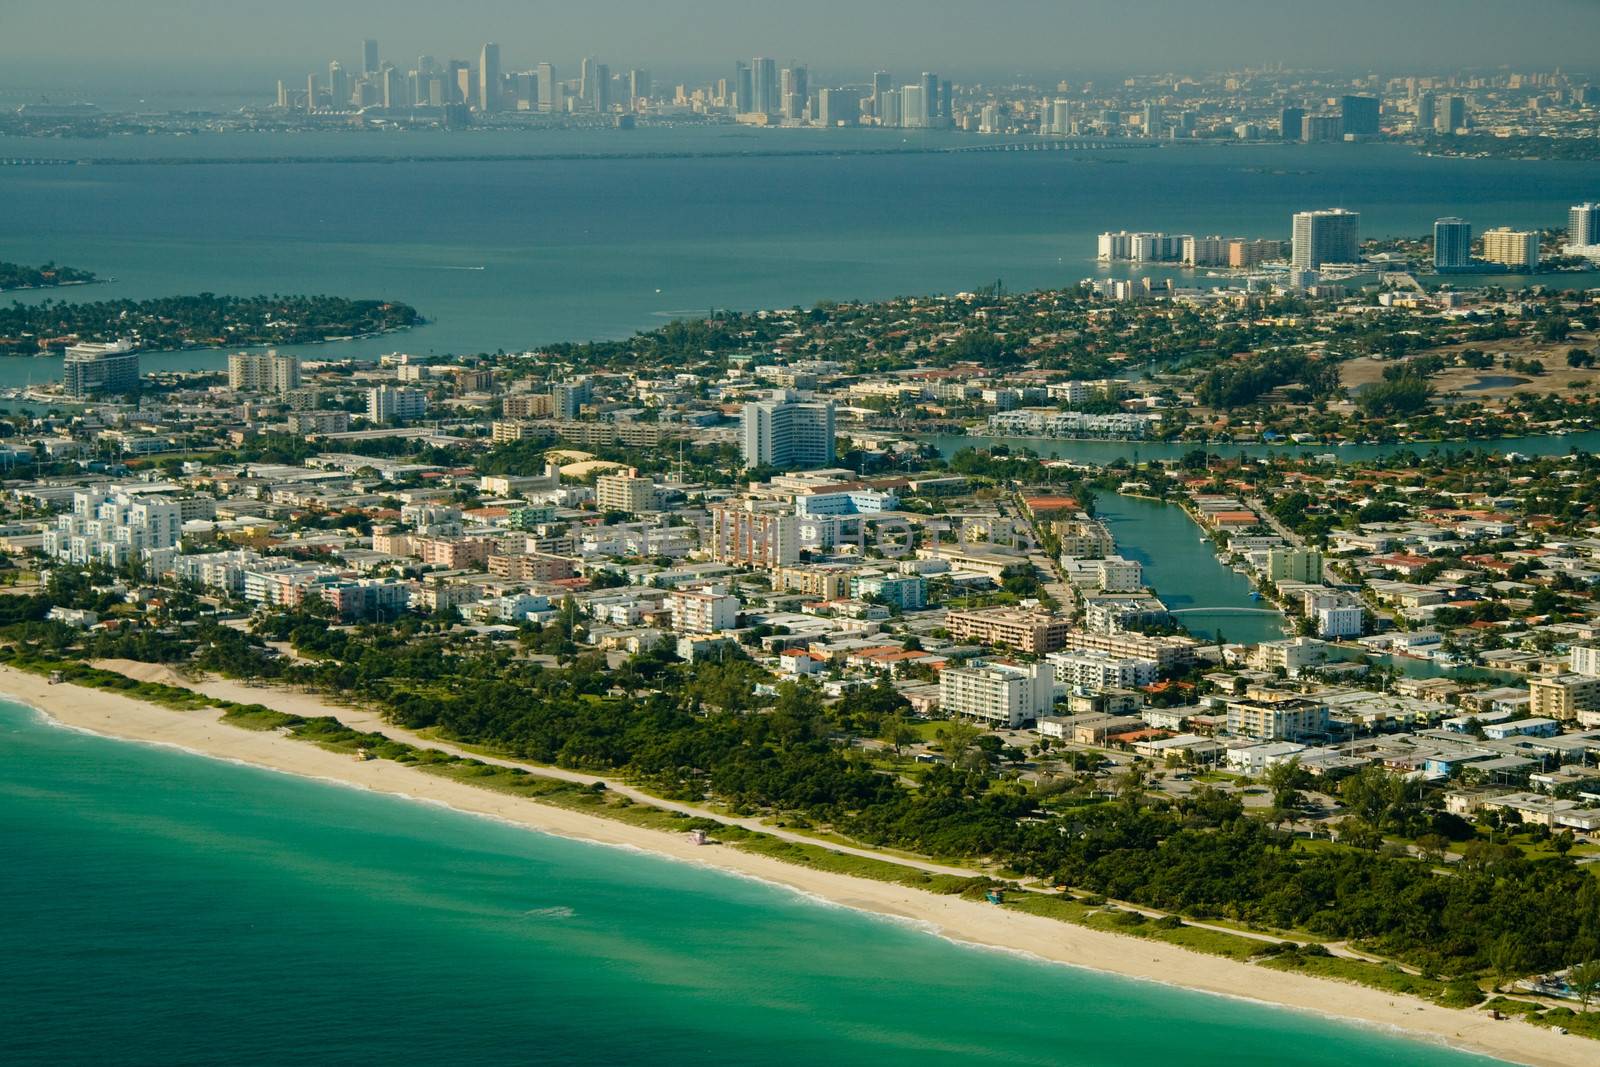 Aerial view of Miami beach and waterfront, Florida, U.S.A.